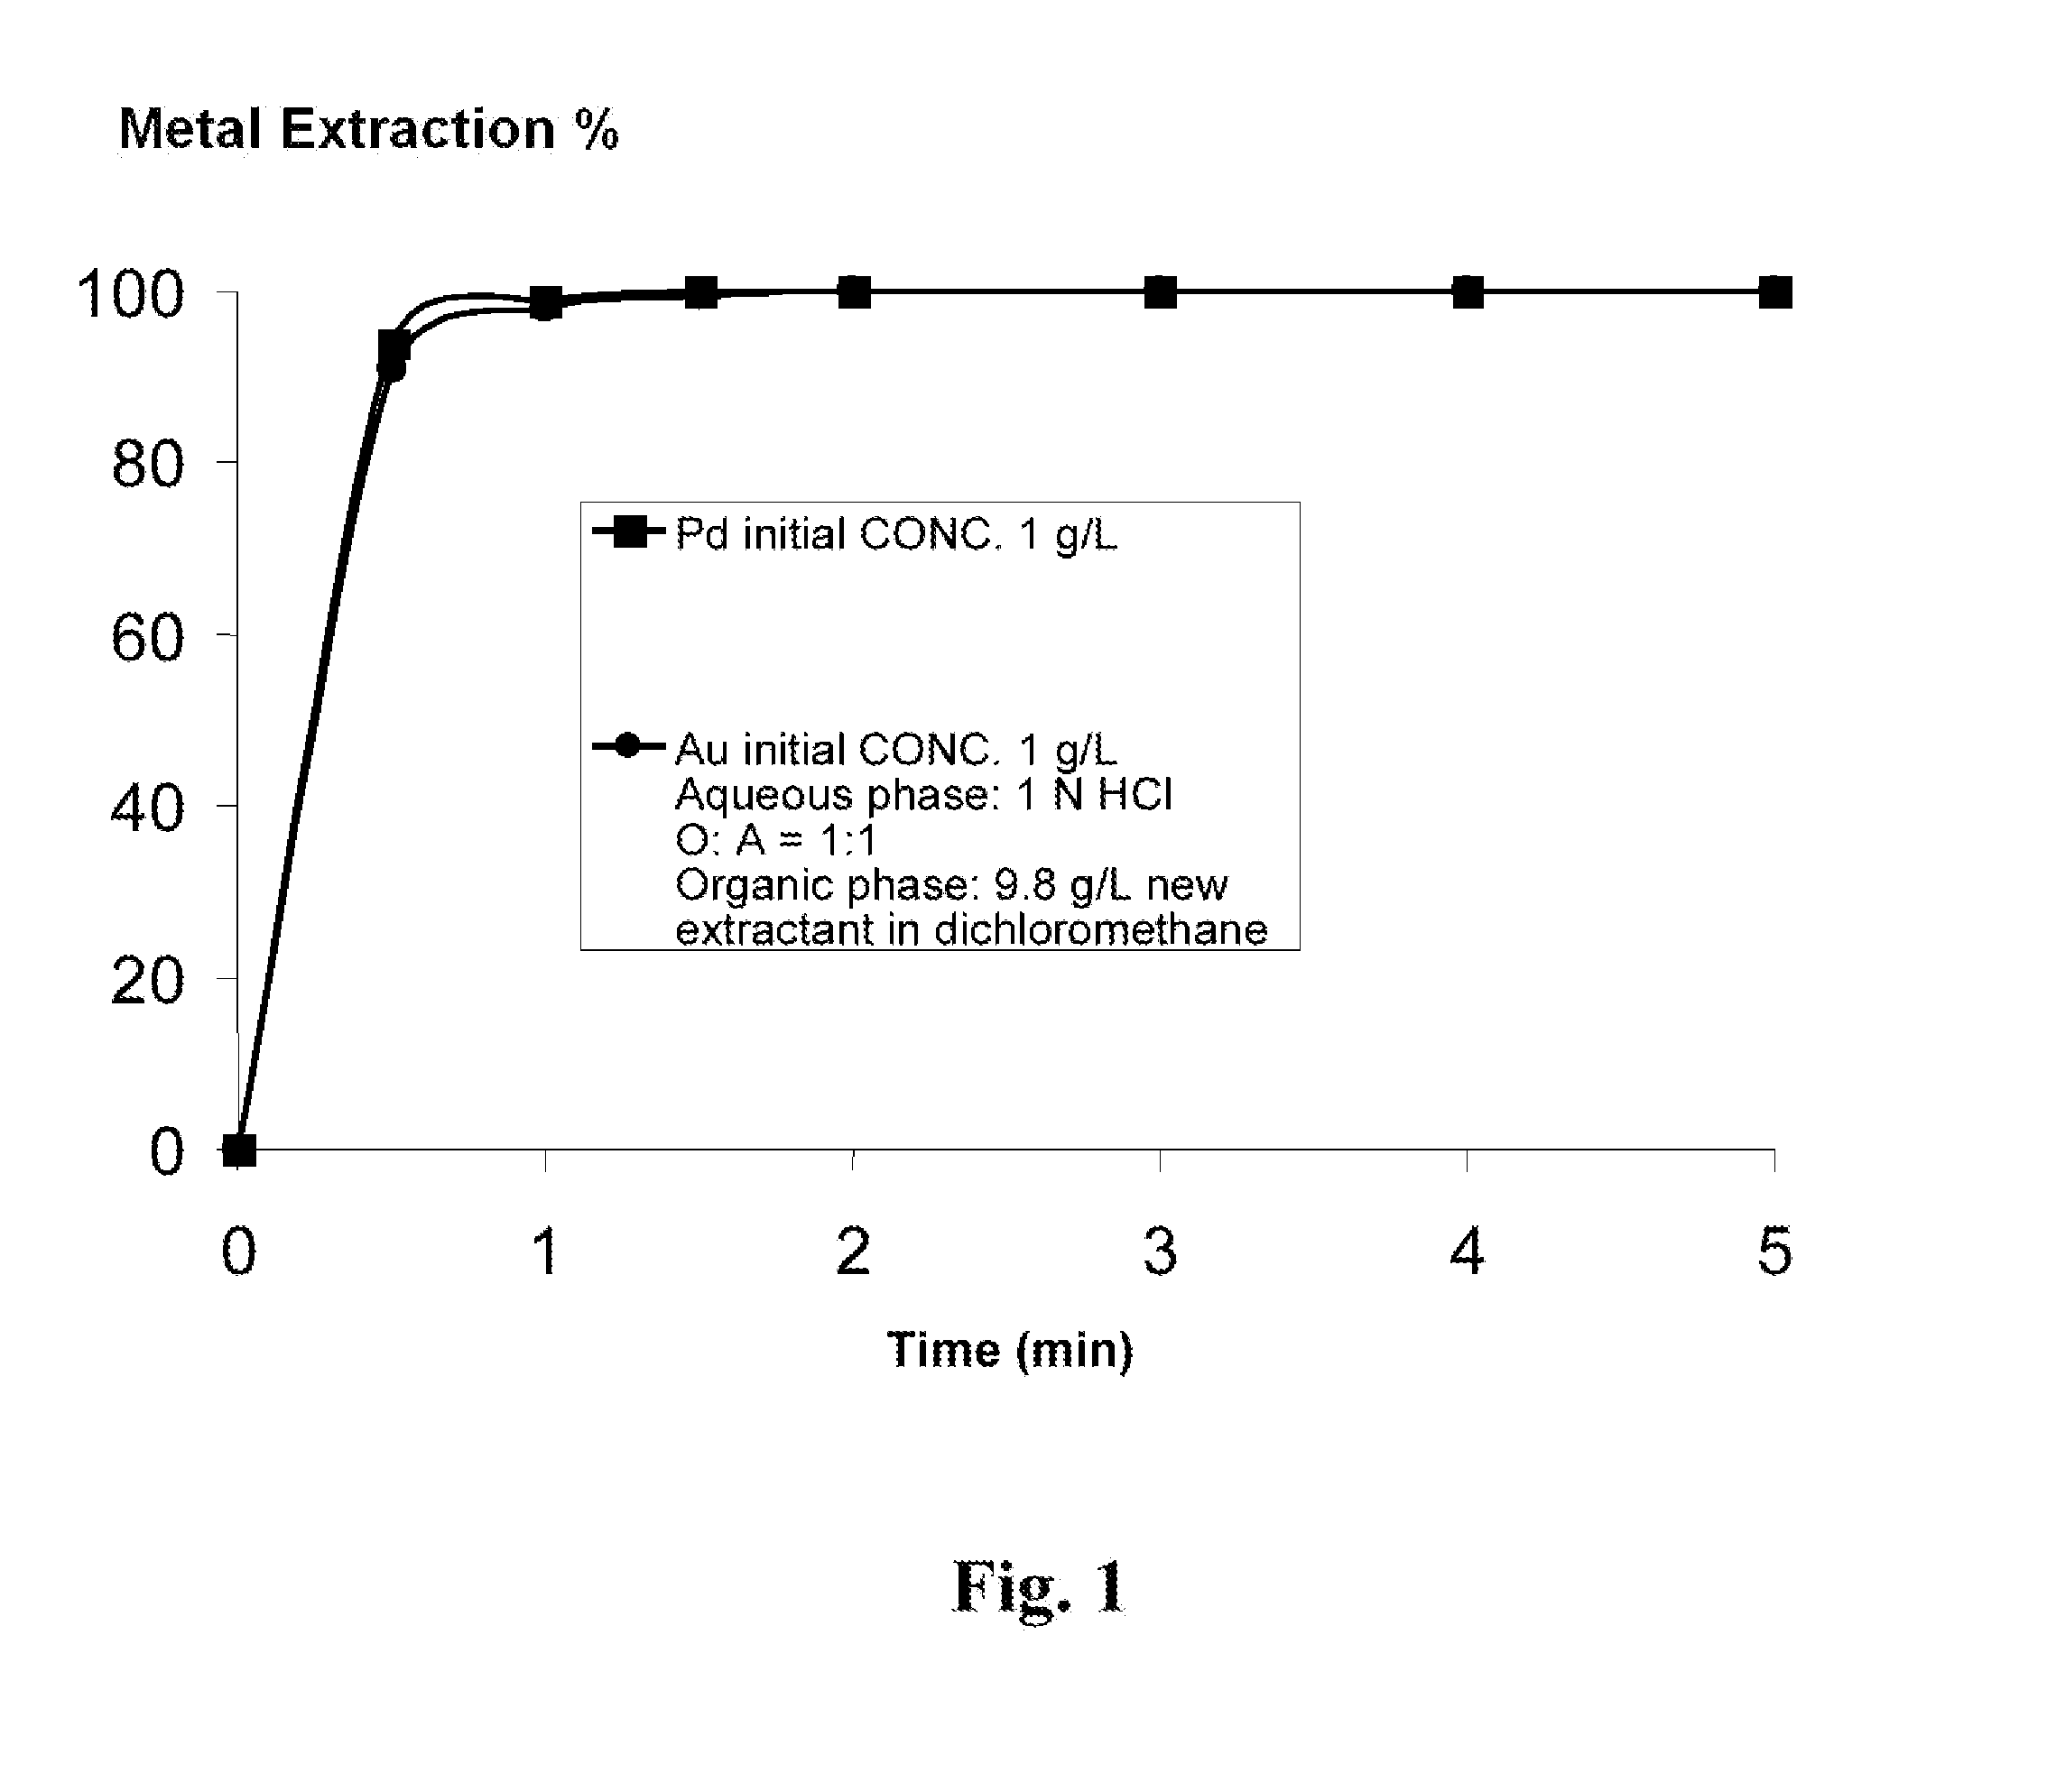 Method and Technique Employing a Novel Extractant to Enhance Recovery of Gold and Palladium from Hydrochloric Acid Media